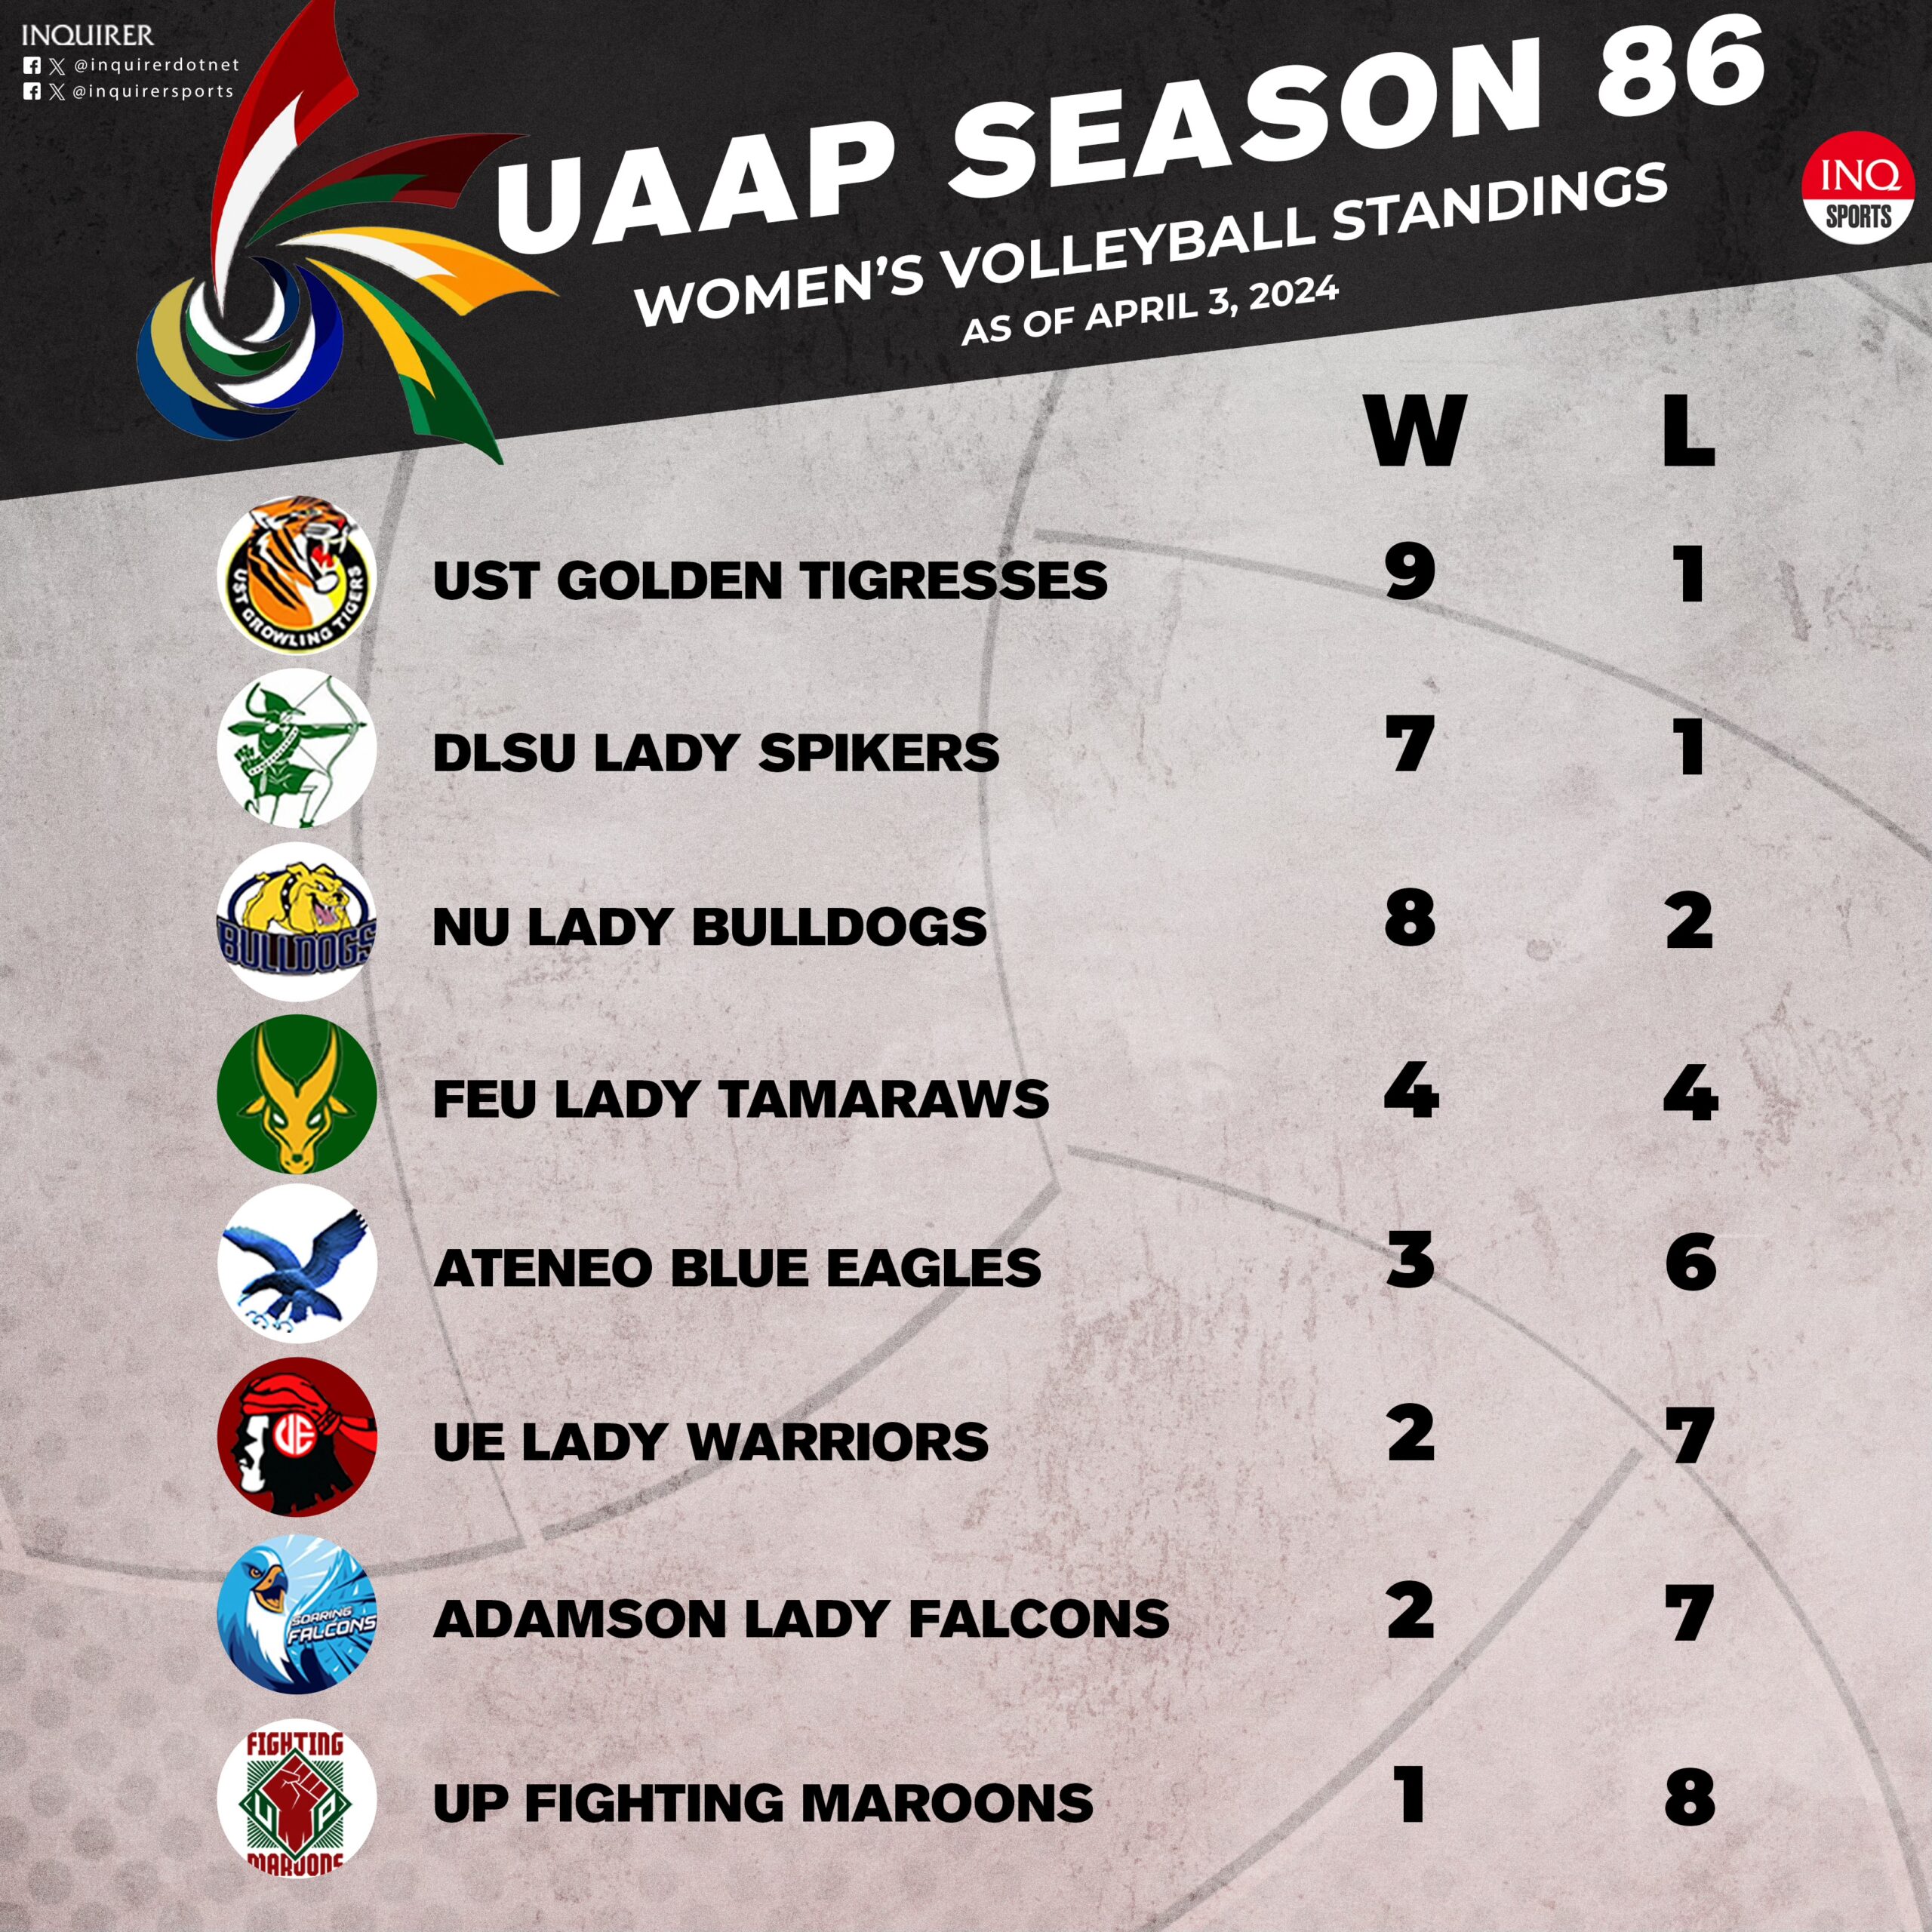 UAAP women's volleyball standings as of April 3